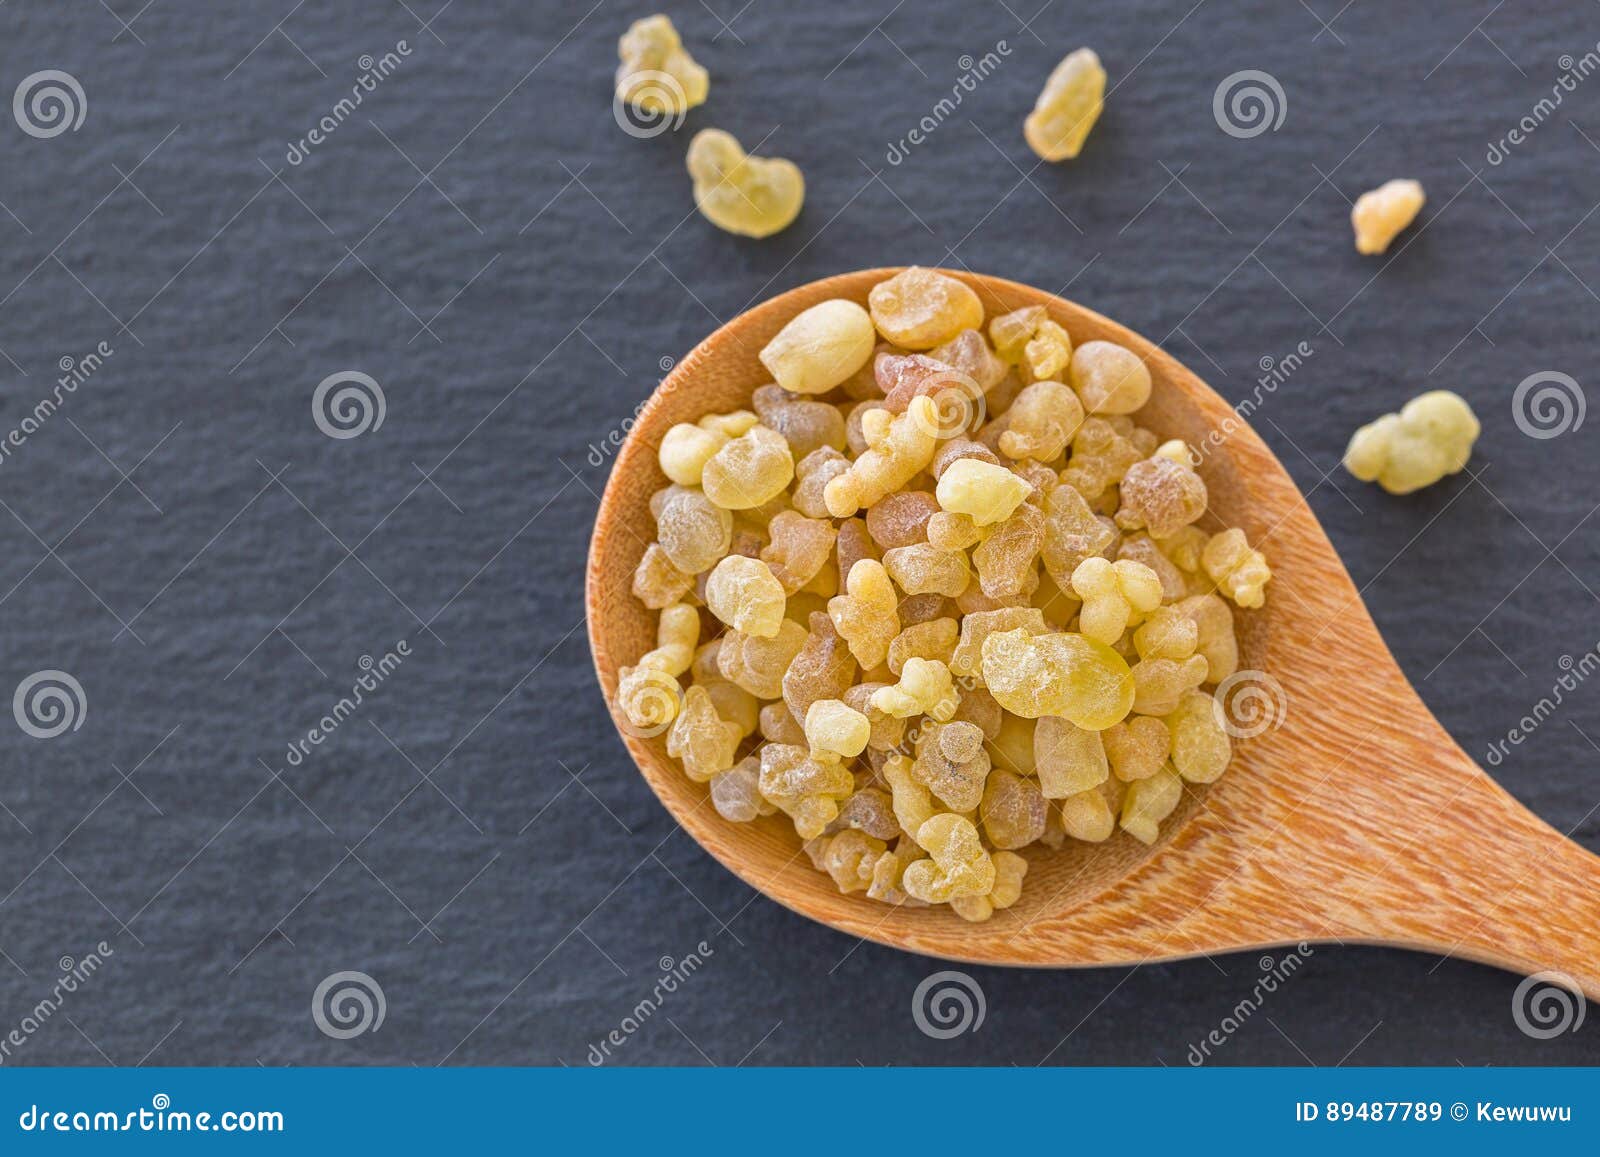 wooden spoon of aromatic yellow resin gum from sudanese frankincense tree, incense made of boswellia sacra tree